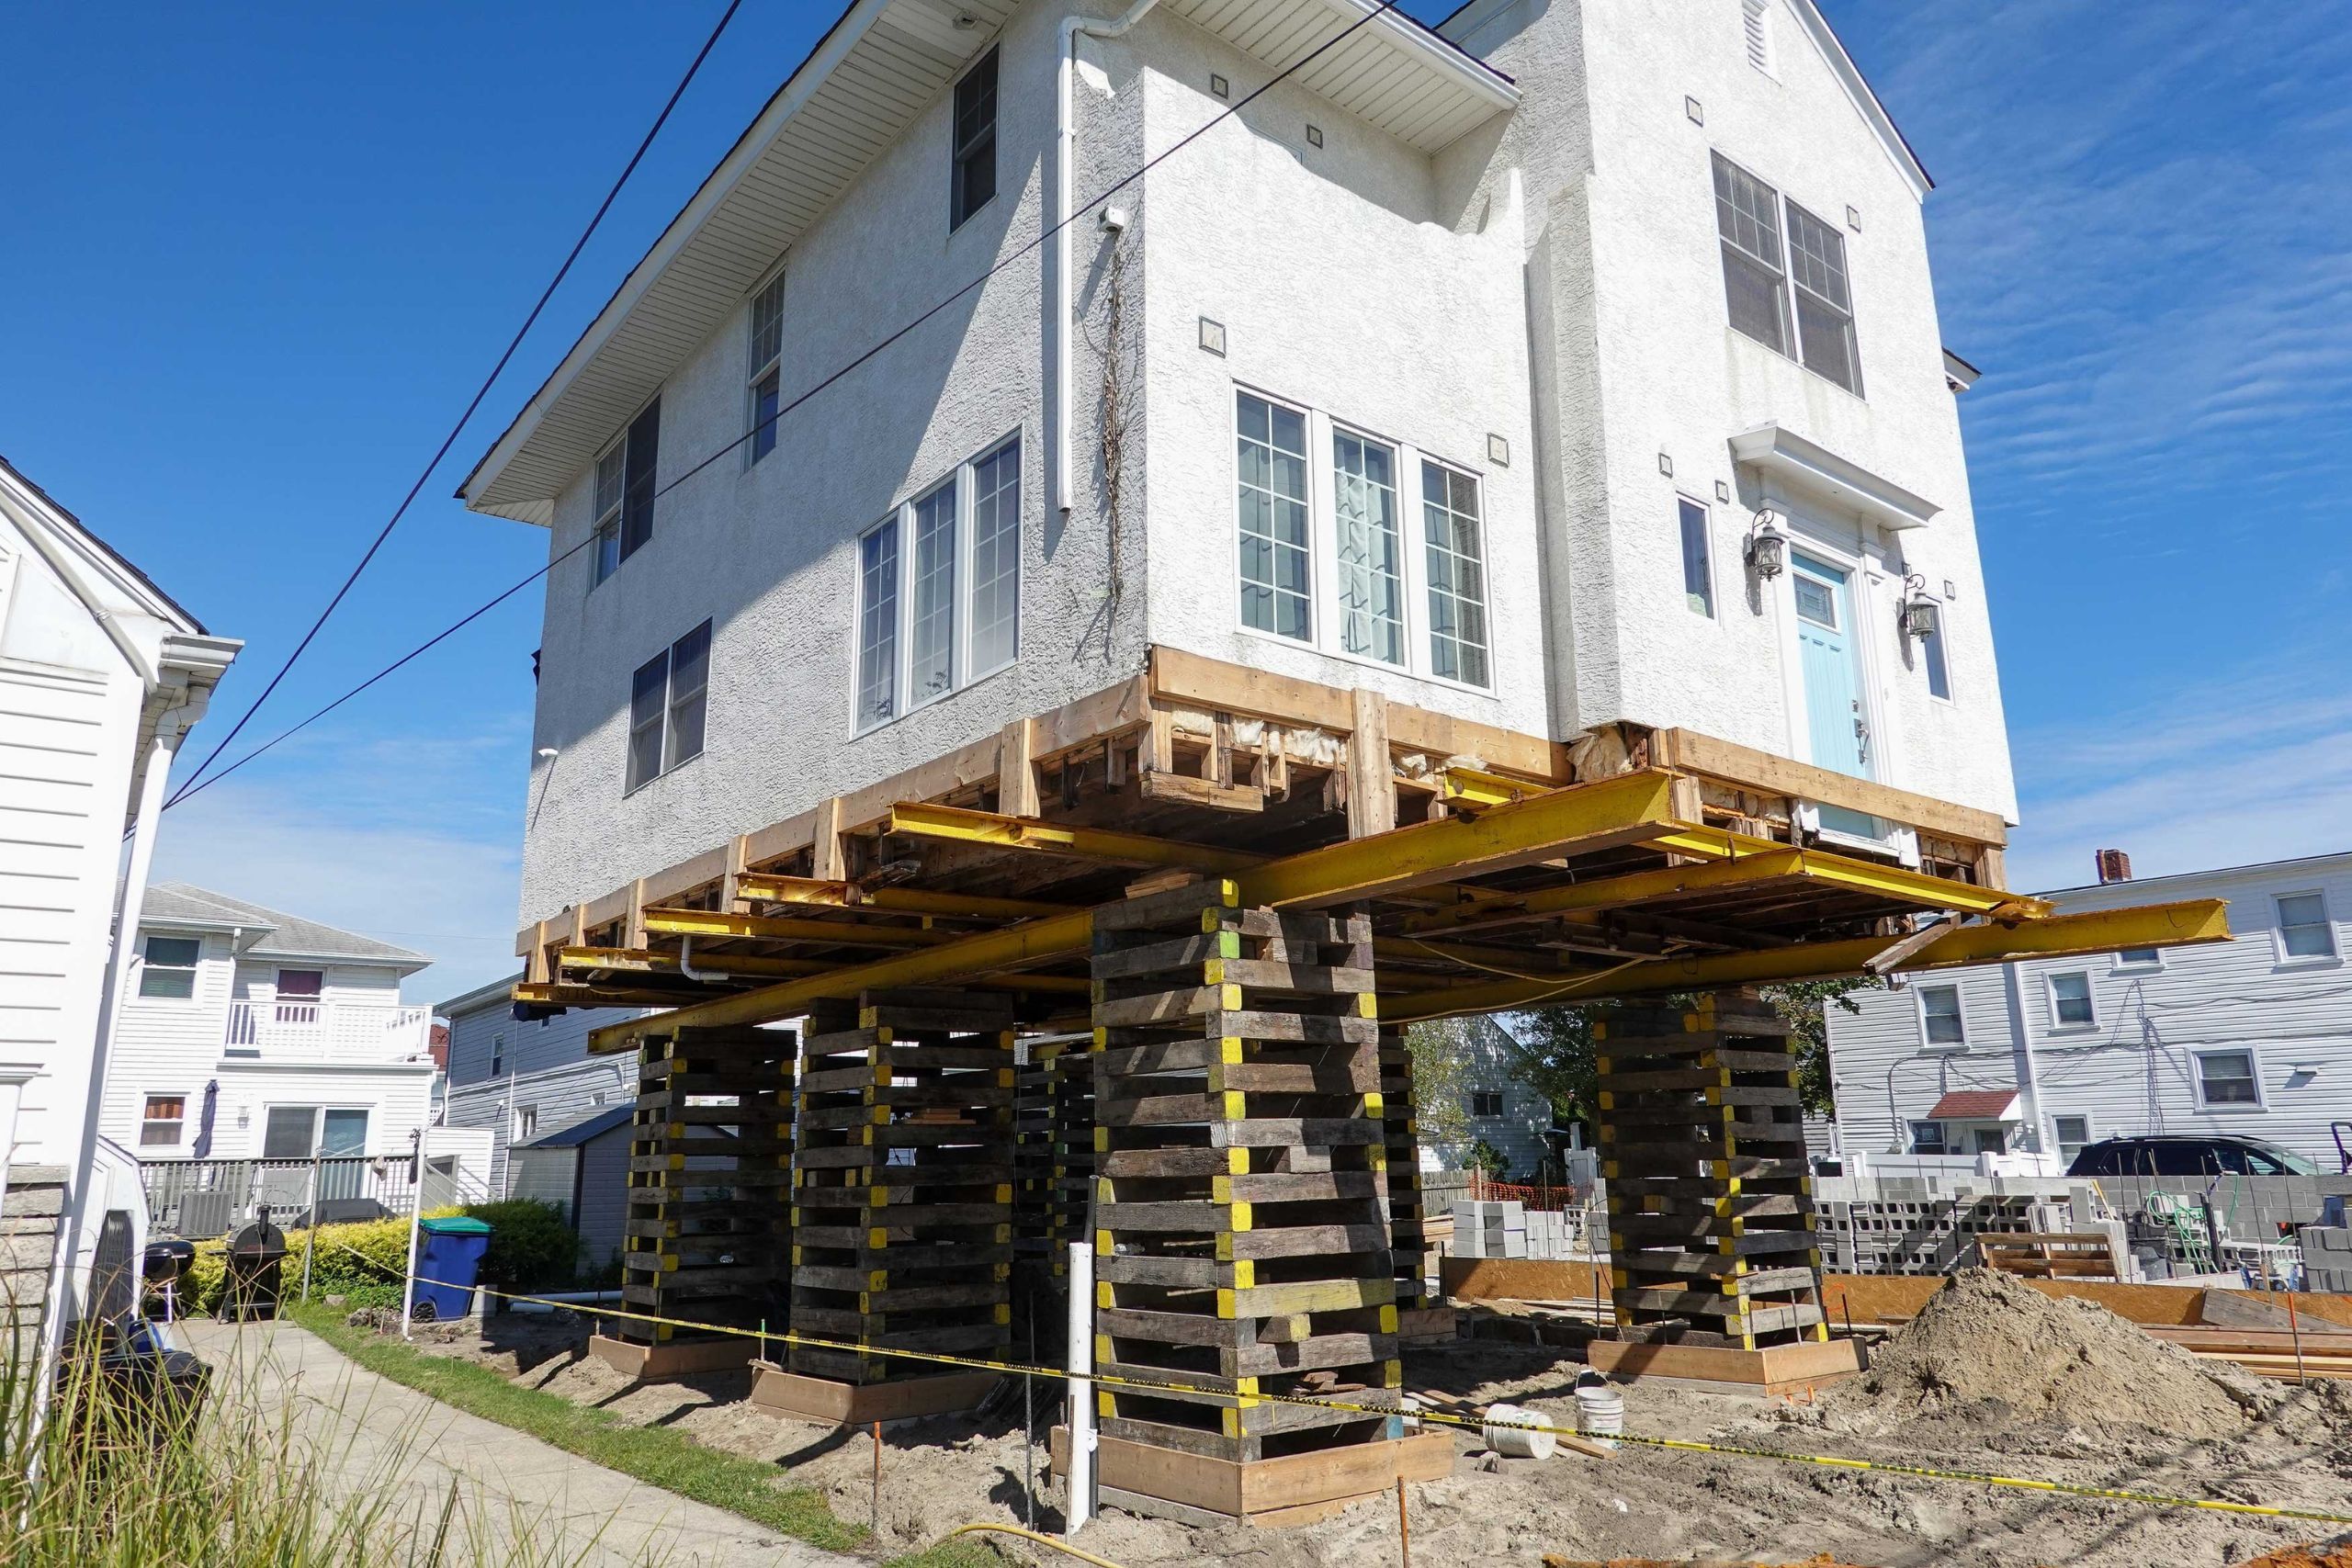 A team of professionals using specialized equipment to raise a house in Myrtle beach, preparing it for elevation and renovation